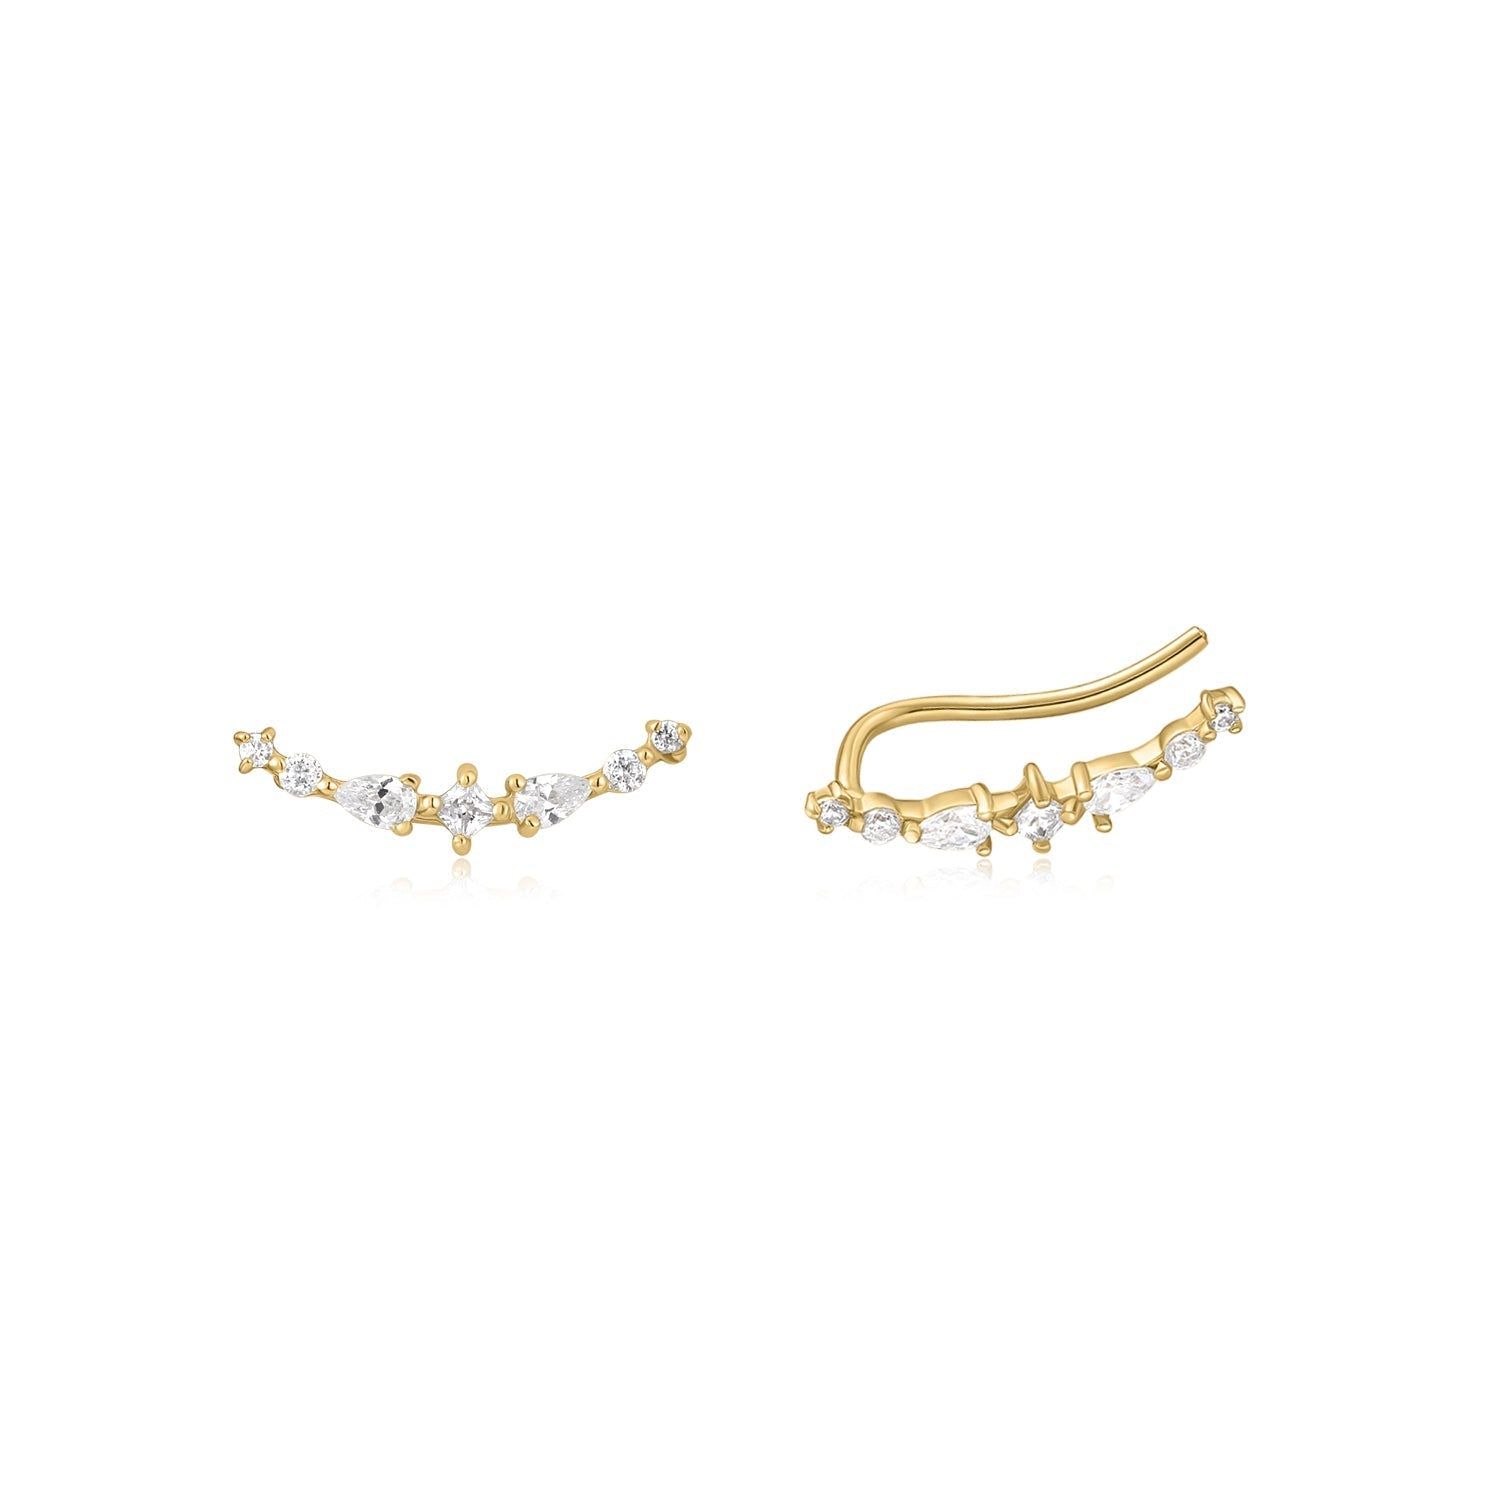 a pair of gold earrings with white stones